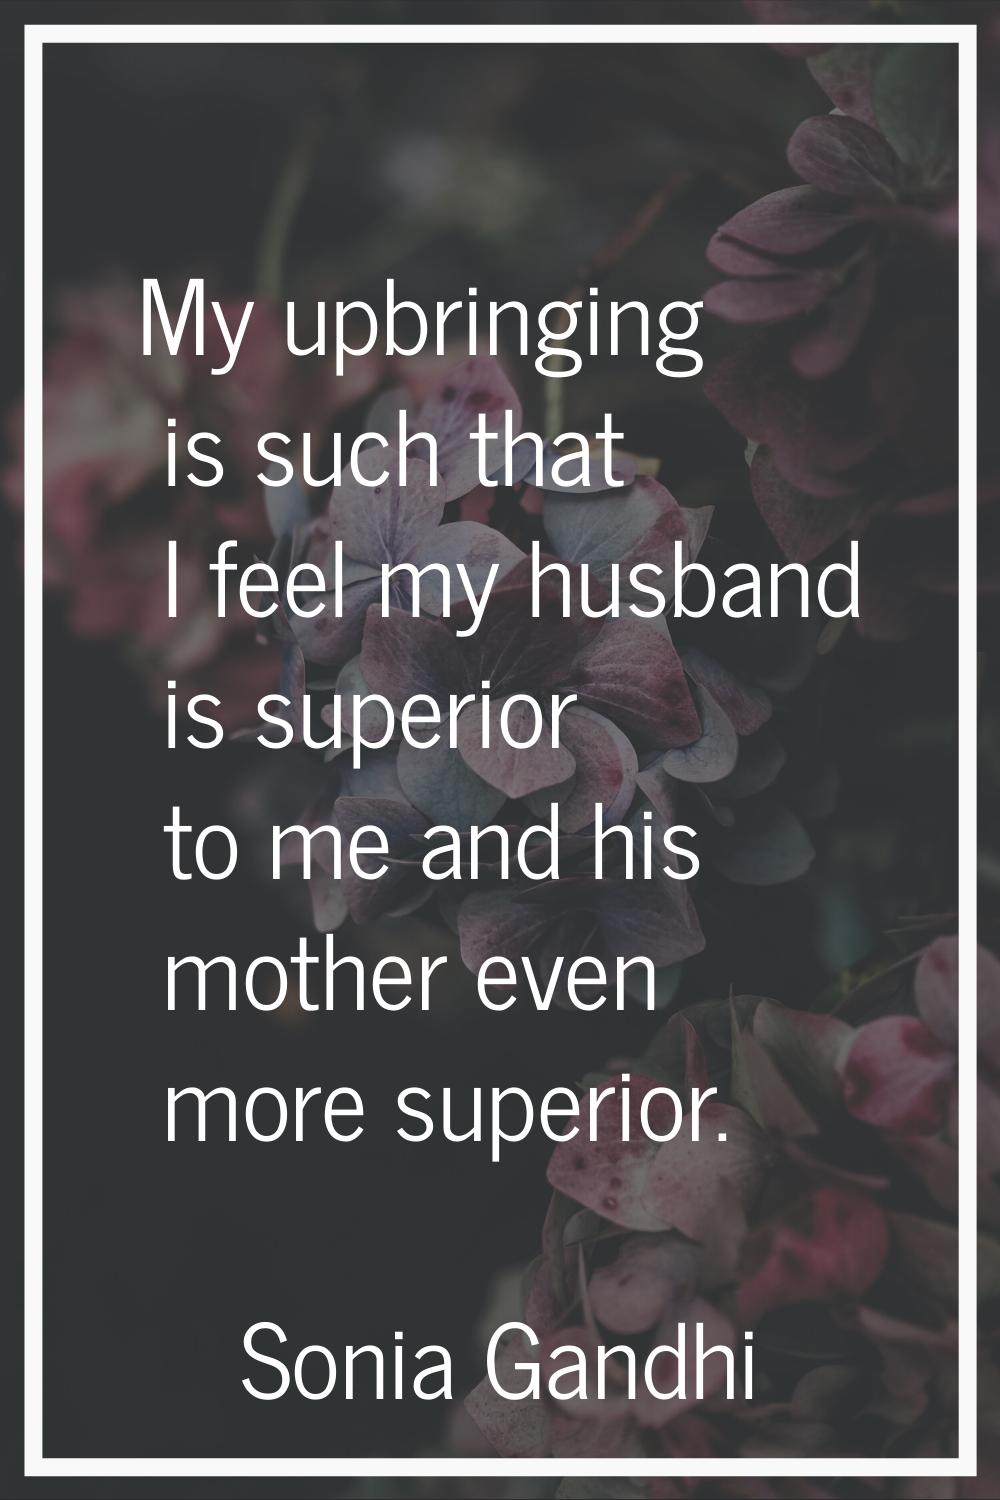 My upbringing is such that I feel my husband is superior to me and his mother even more superior.